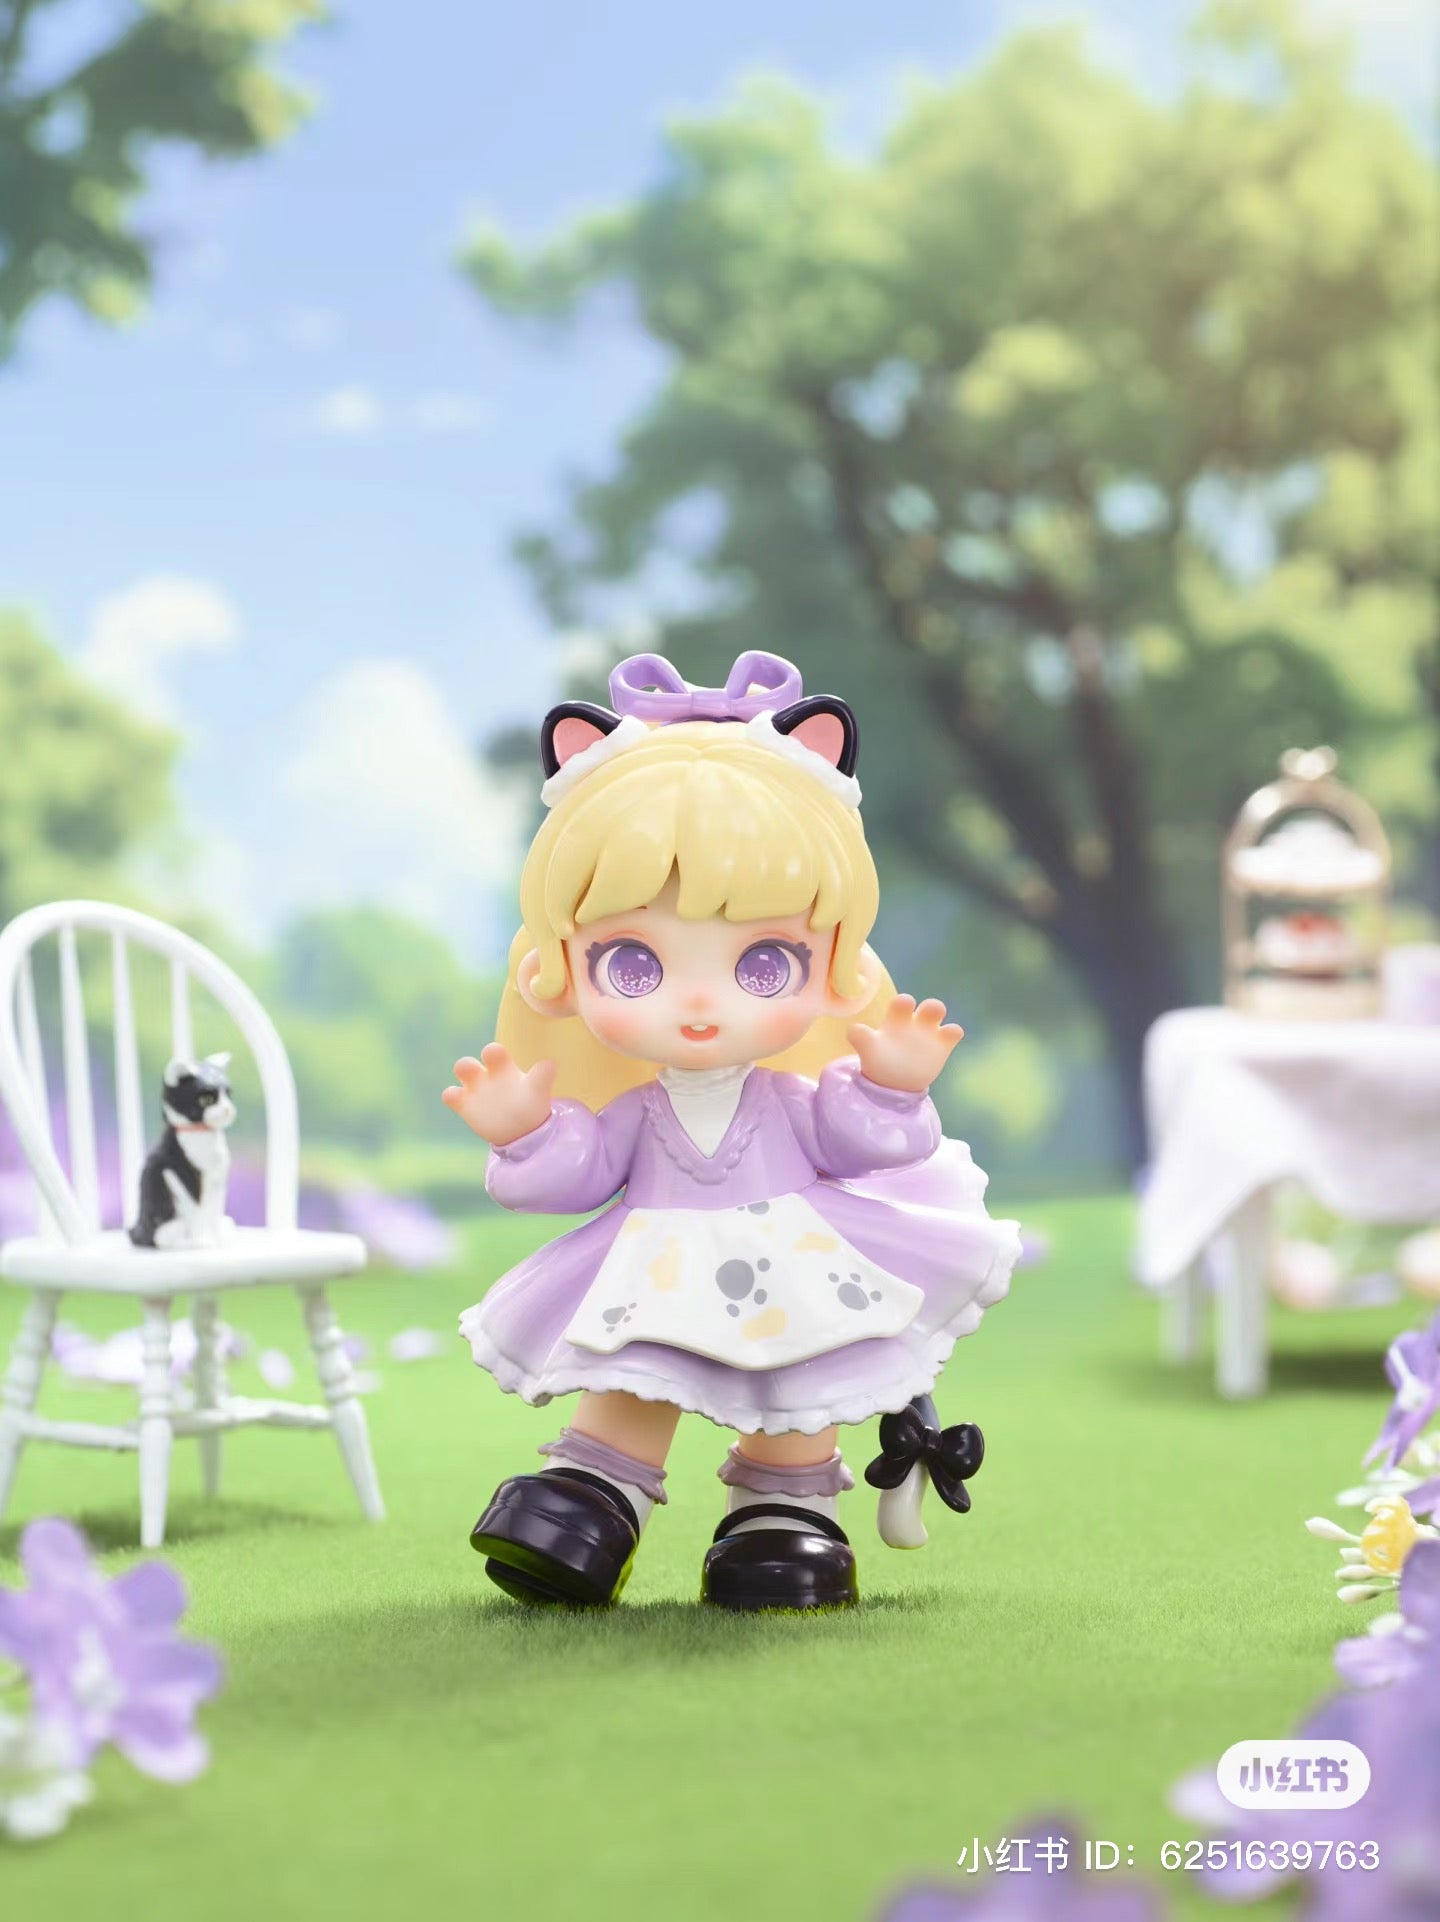 Alt text: Miana - Tea Party In The Forest Blind Box Series toy doll in a garden setting.